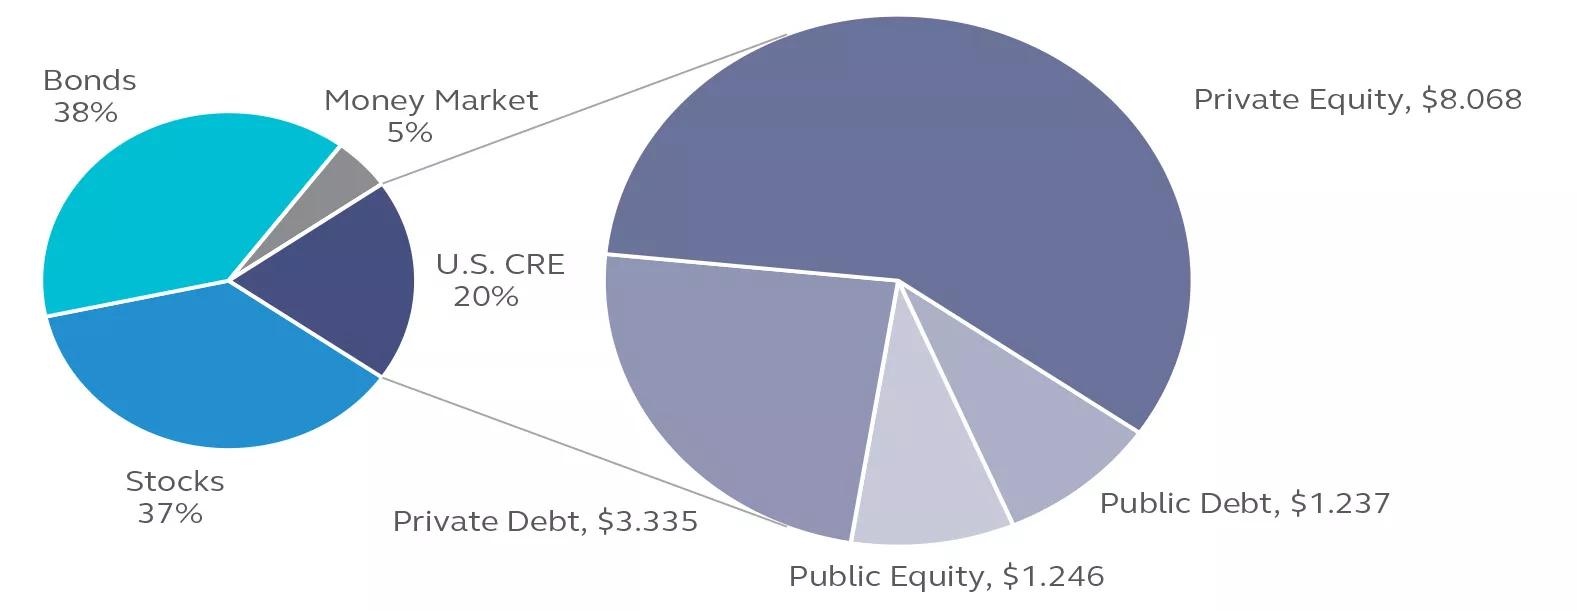 Two pie charts showing the commercial real estate share breakdown as of Q4 2019